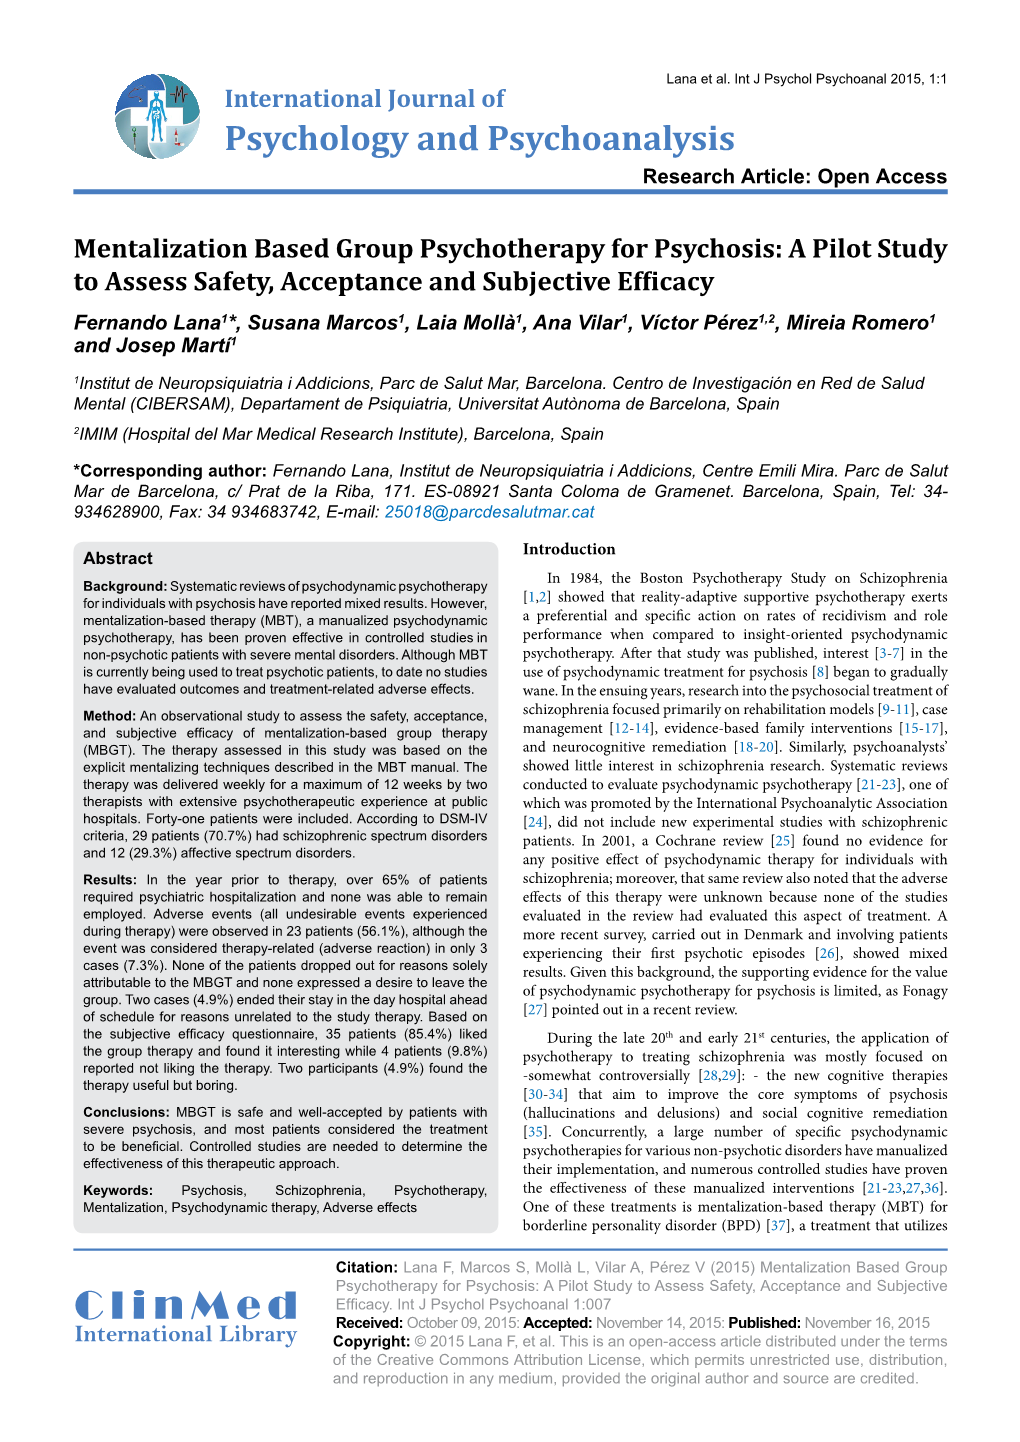 Mentalization Based Group Psychotherapy for Psychosis